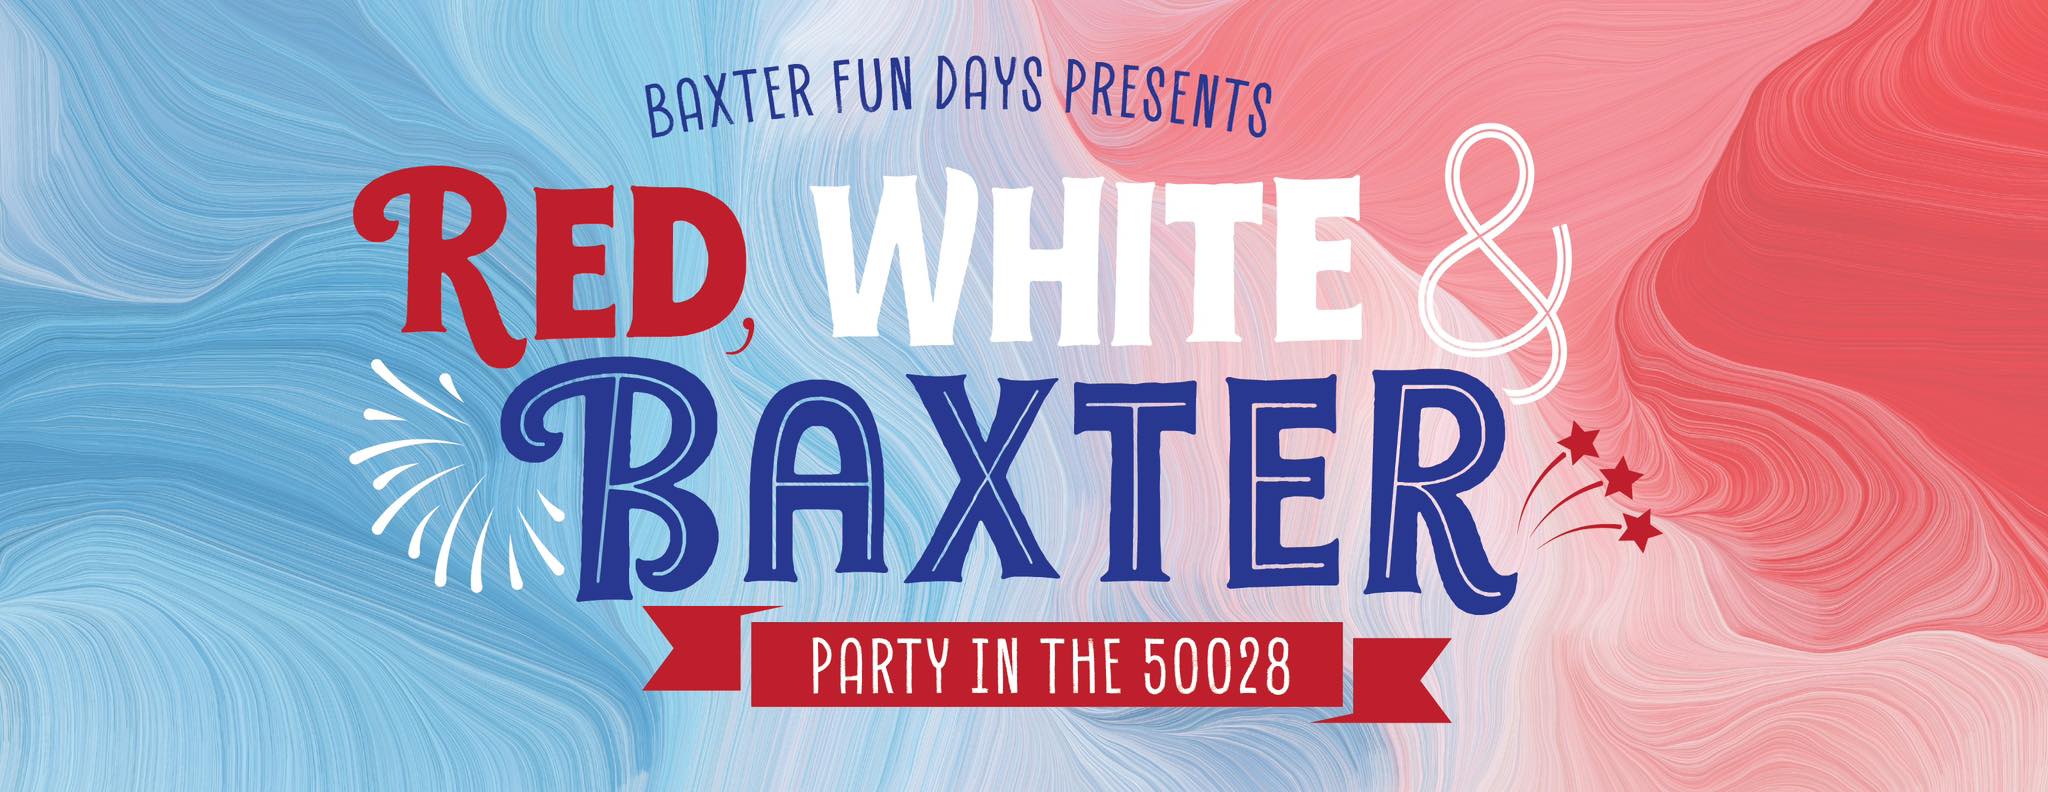 Event Promo Photo For Baxter Fun Days